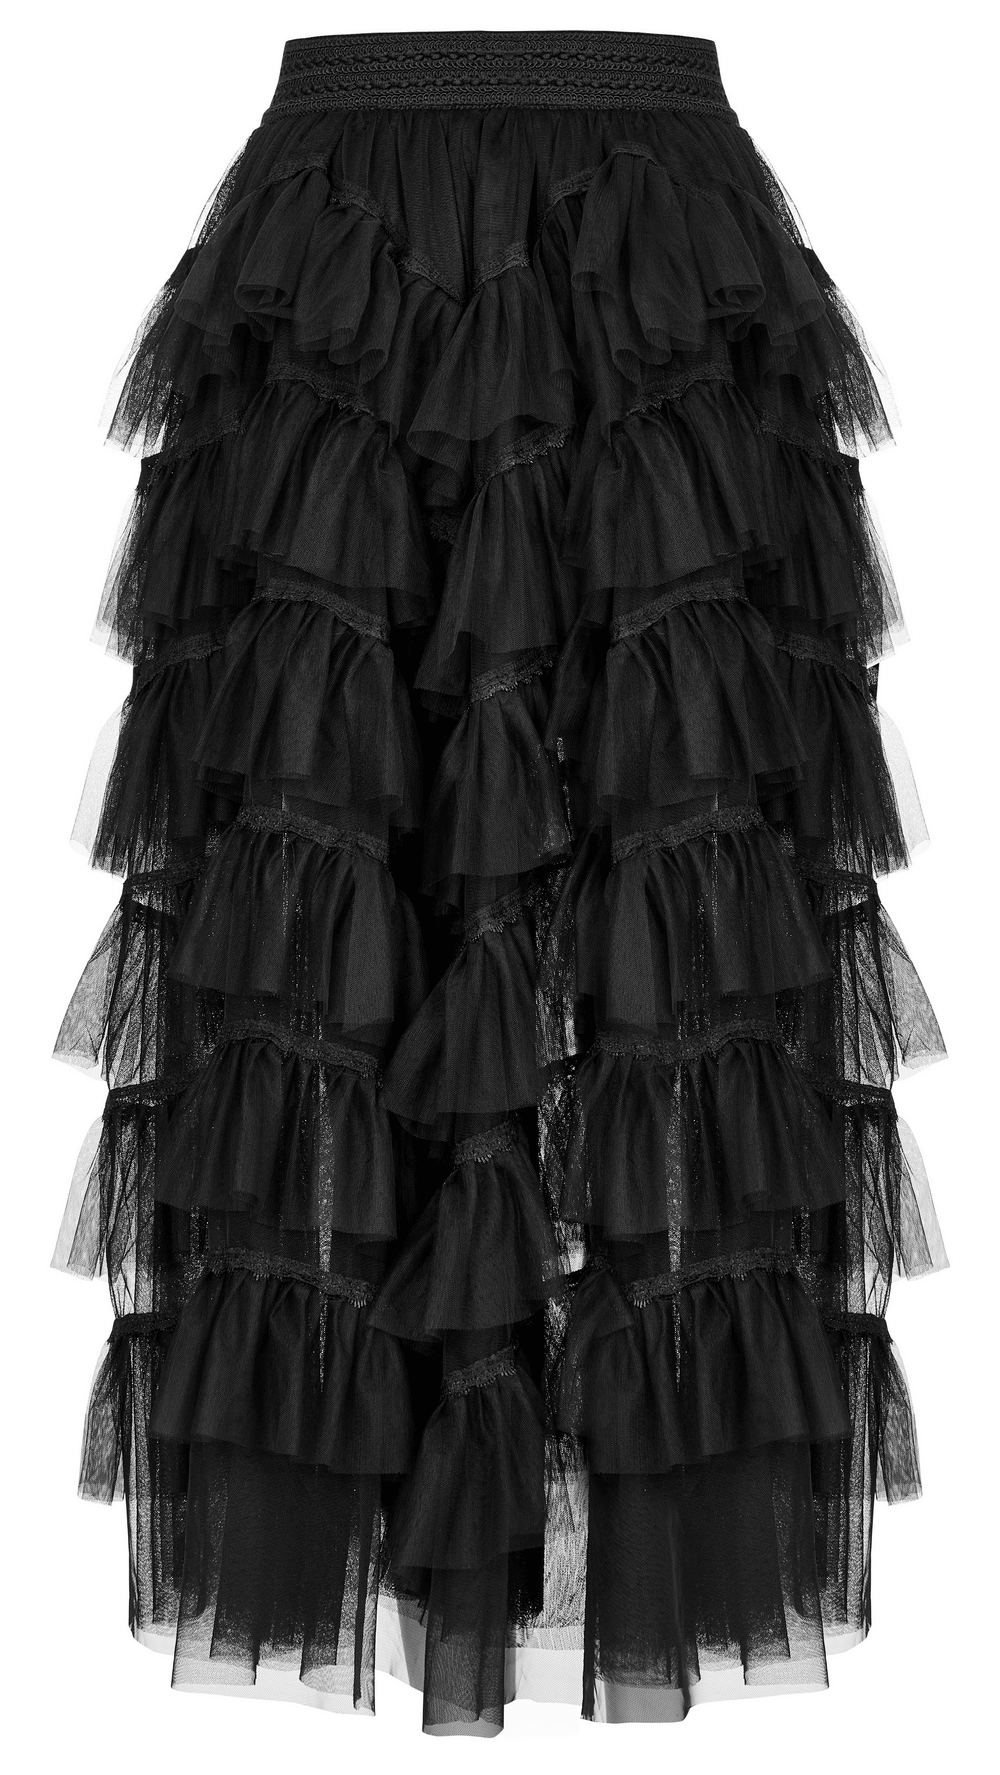 Gothic Tiered Tulle Ruffle Skirt with Accents